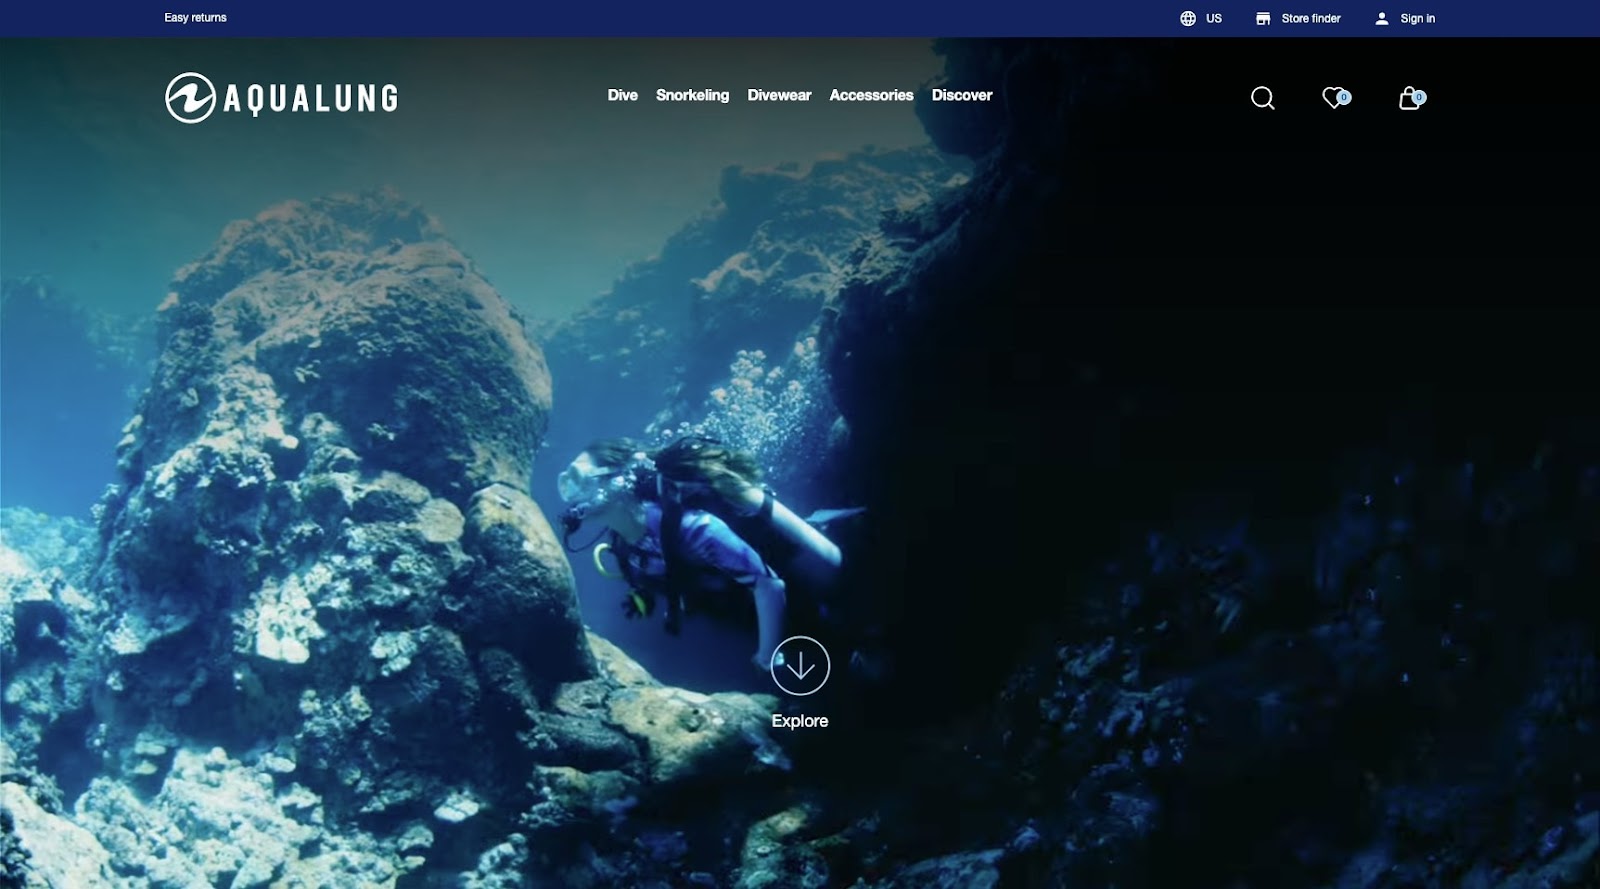 aqualung diving equipment homepage